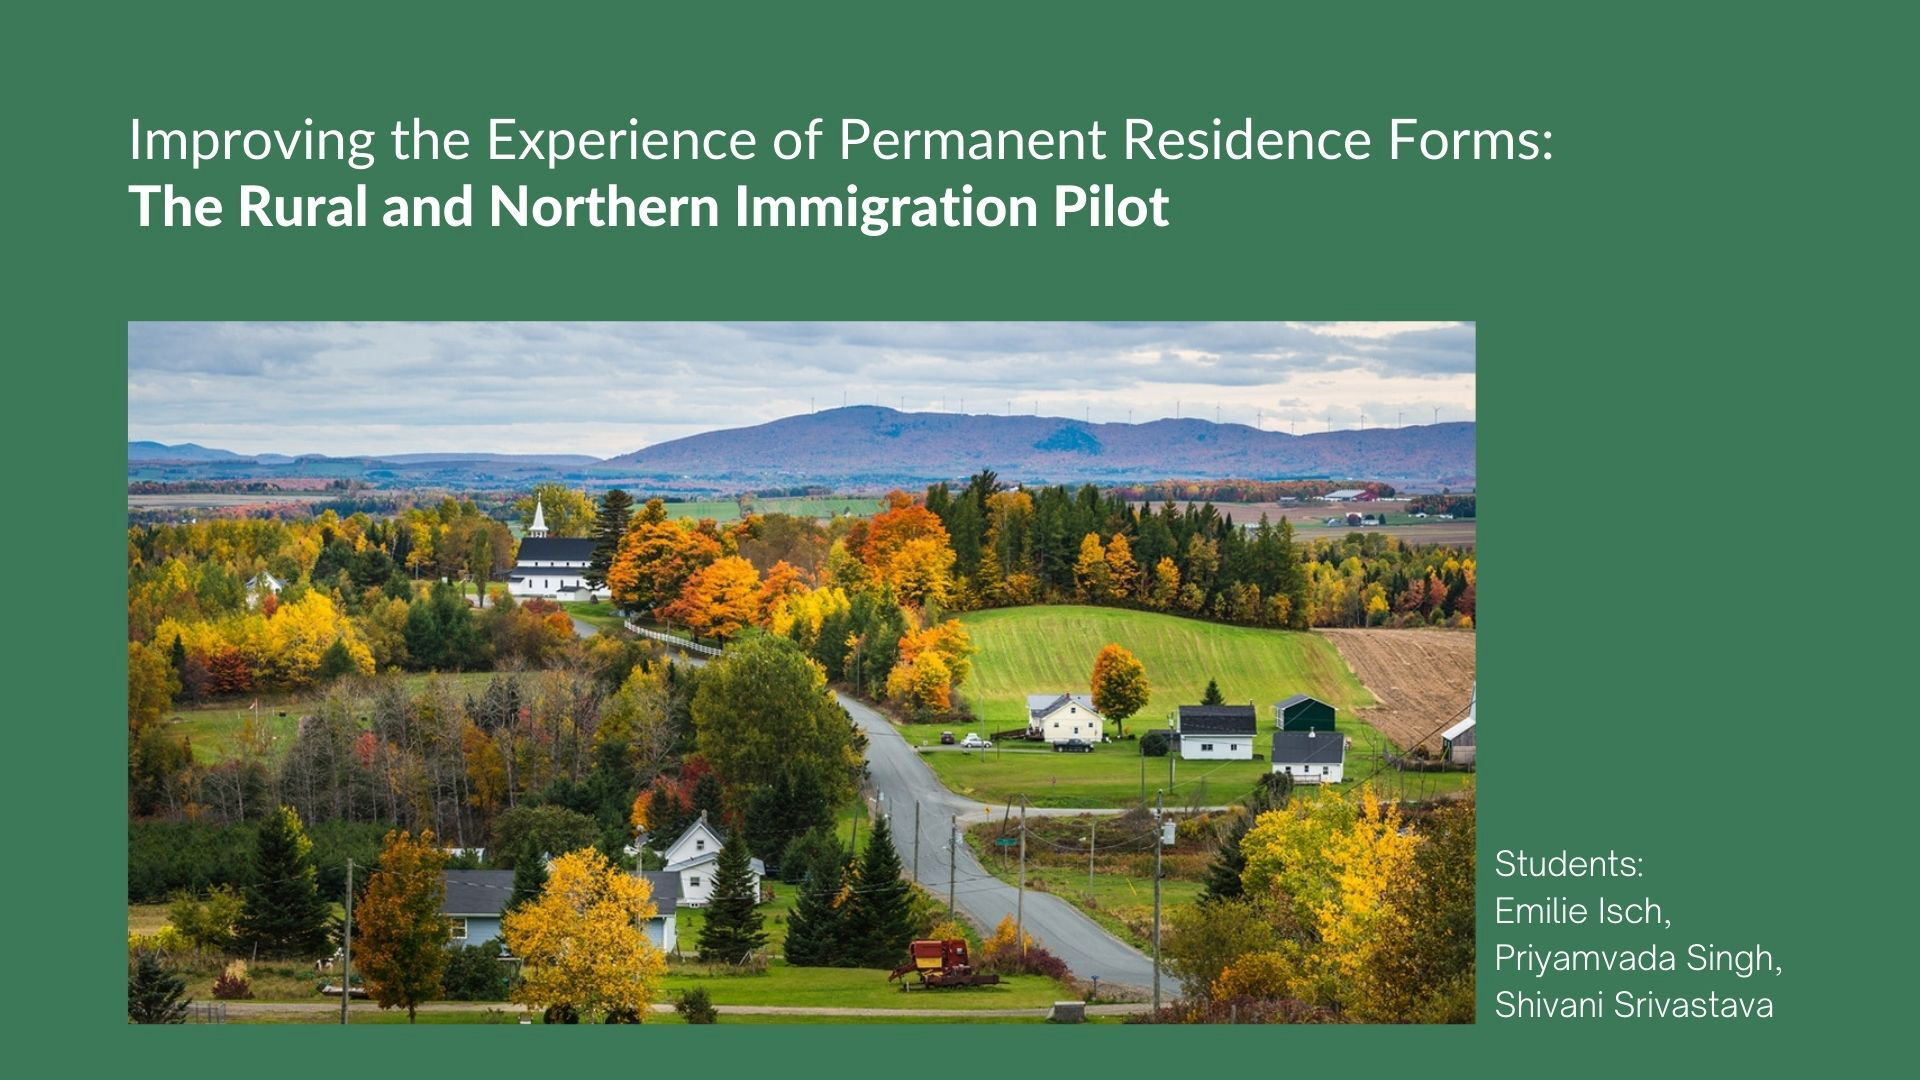 Improving the Experience of Permanent Residence Forms: The Rural and Northern Immigration Pilot